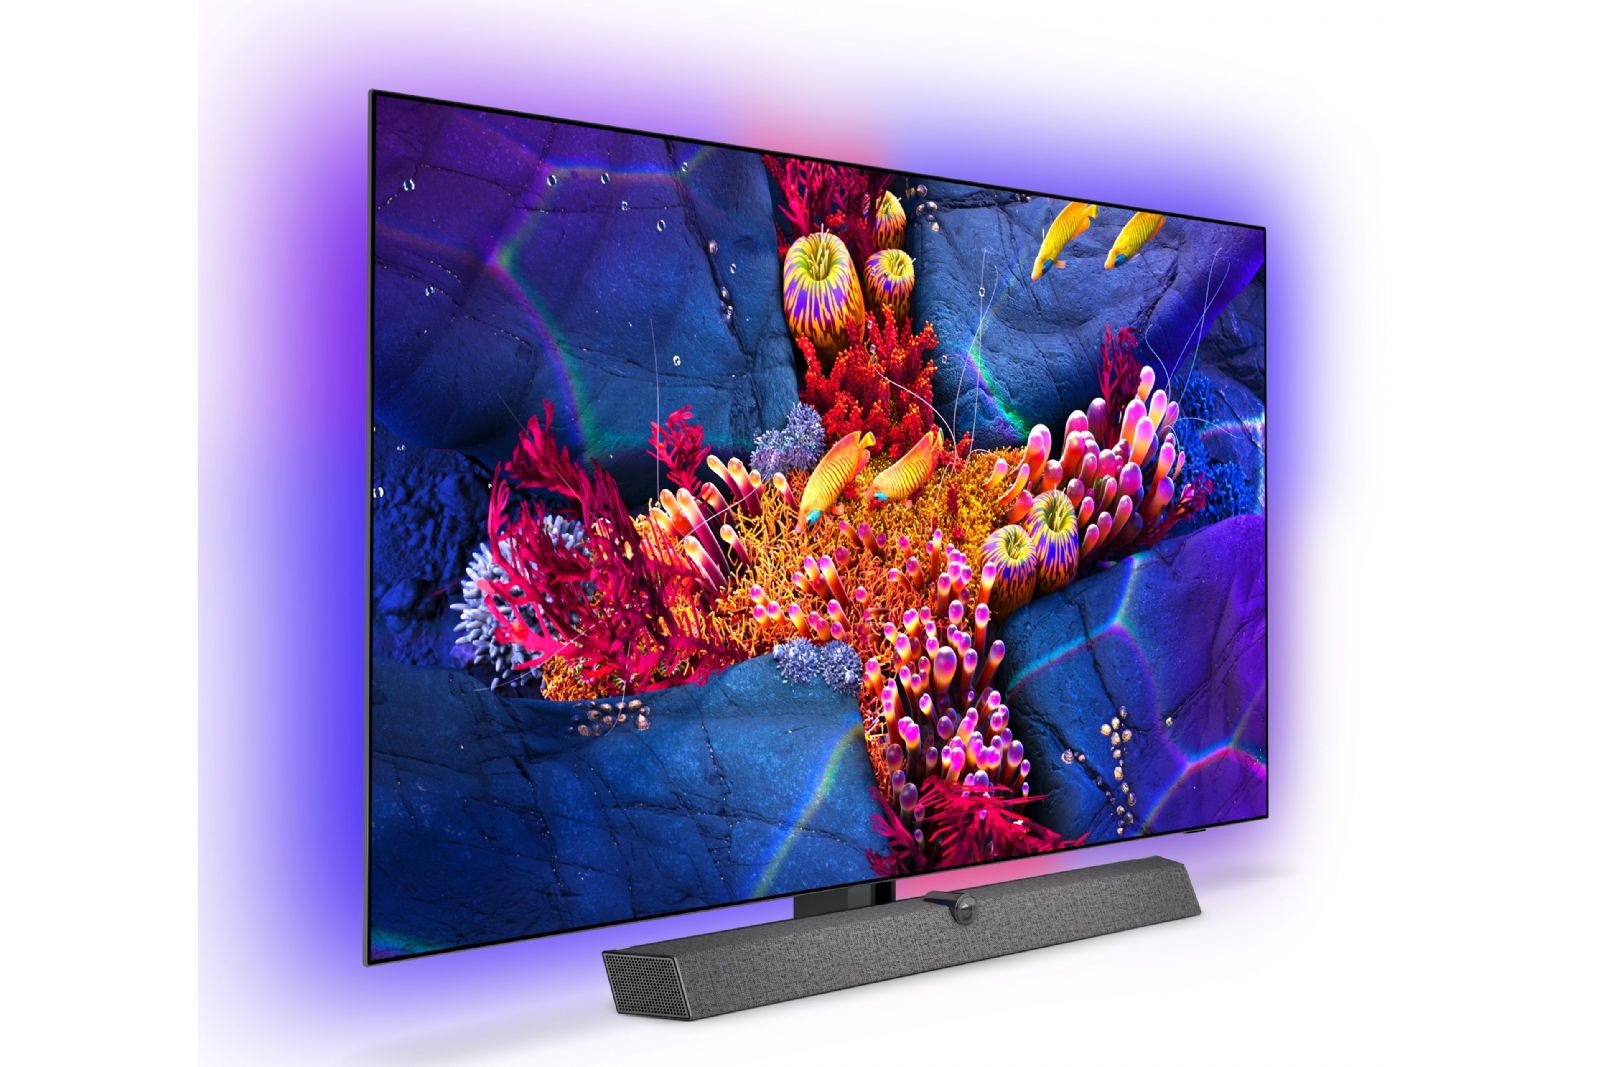 TV-apparater Philips 77OLED937/12 77-tums 4K UHD Smart-TV